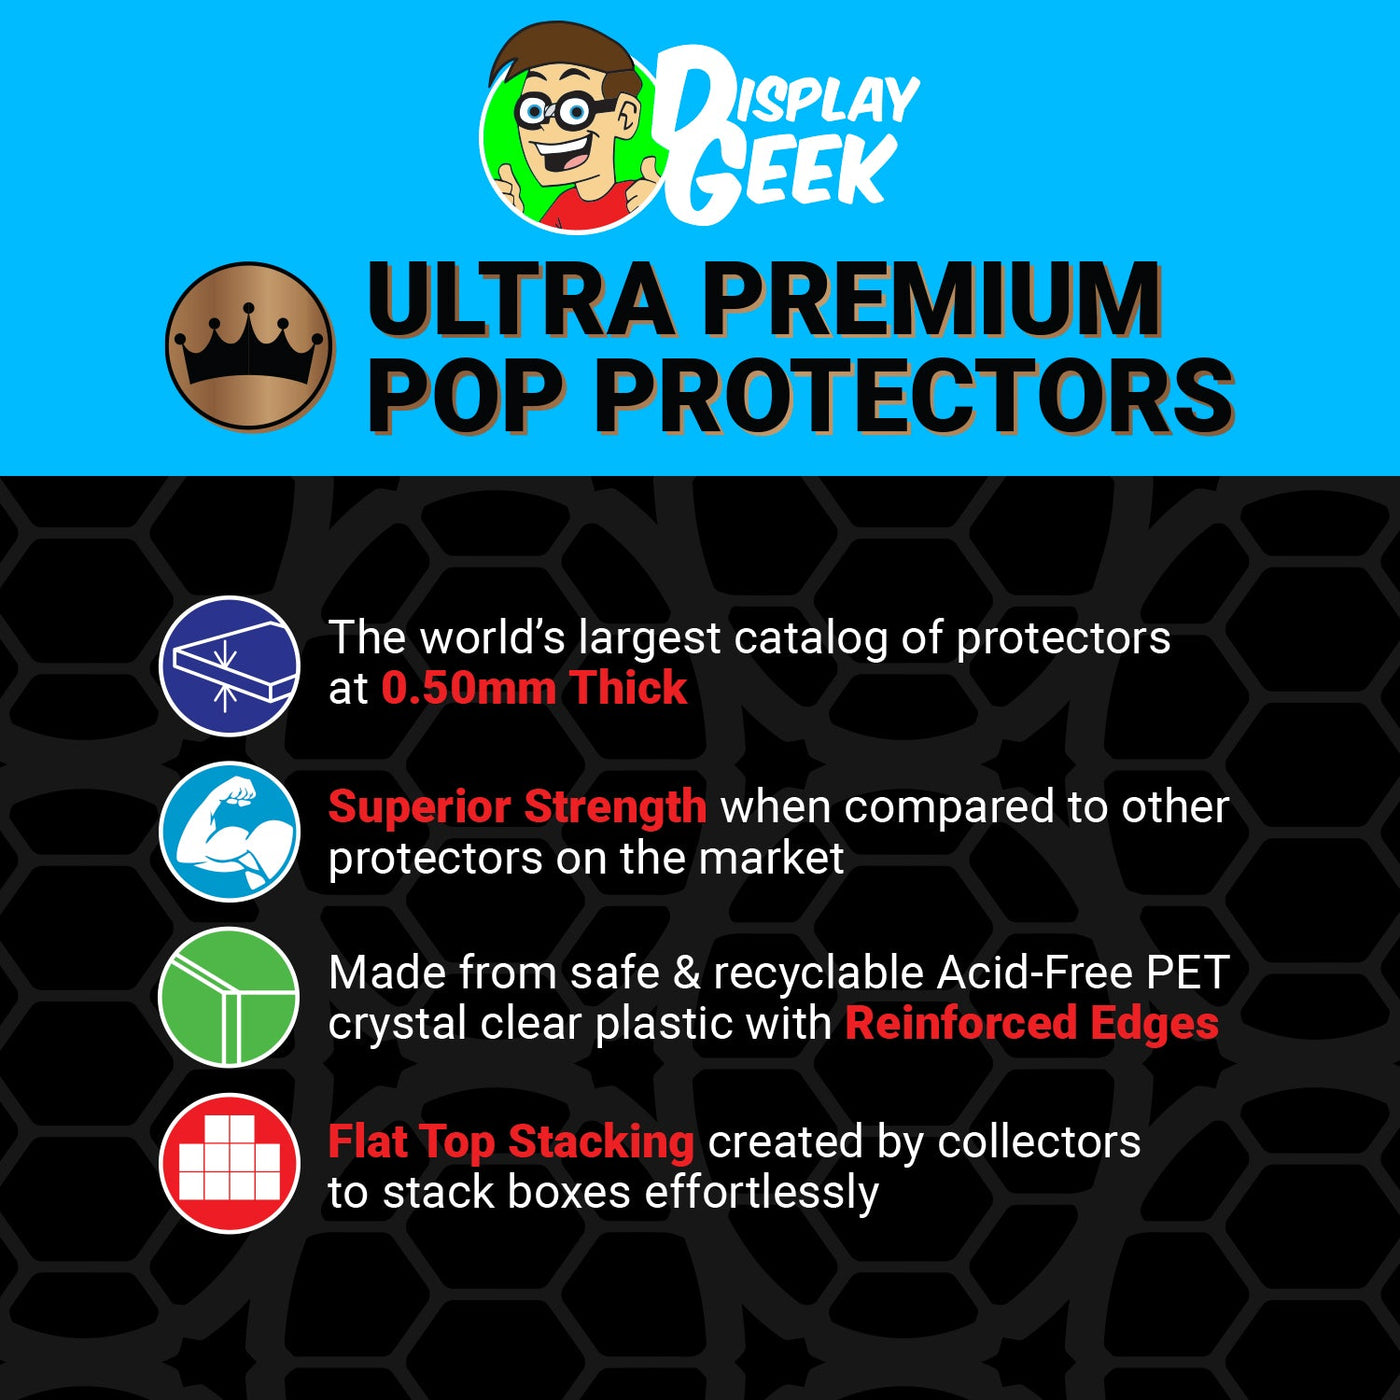 Pop Protector for Lock, Shock & Barrel in Tub #474 Funko Pop Movie Moments on The Protector Guide App by Display Geek